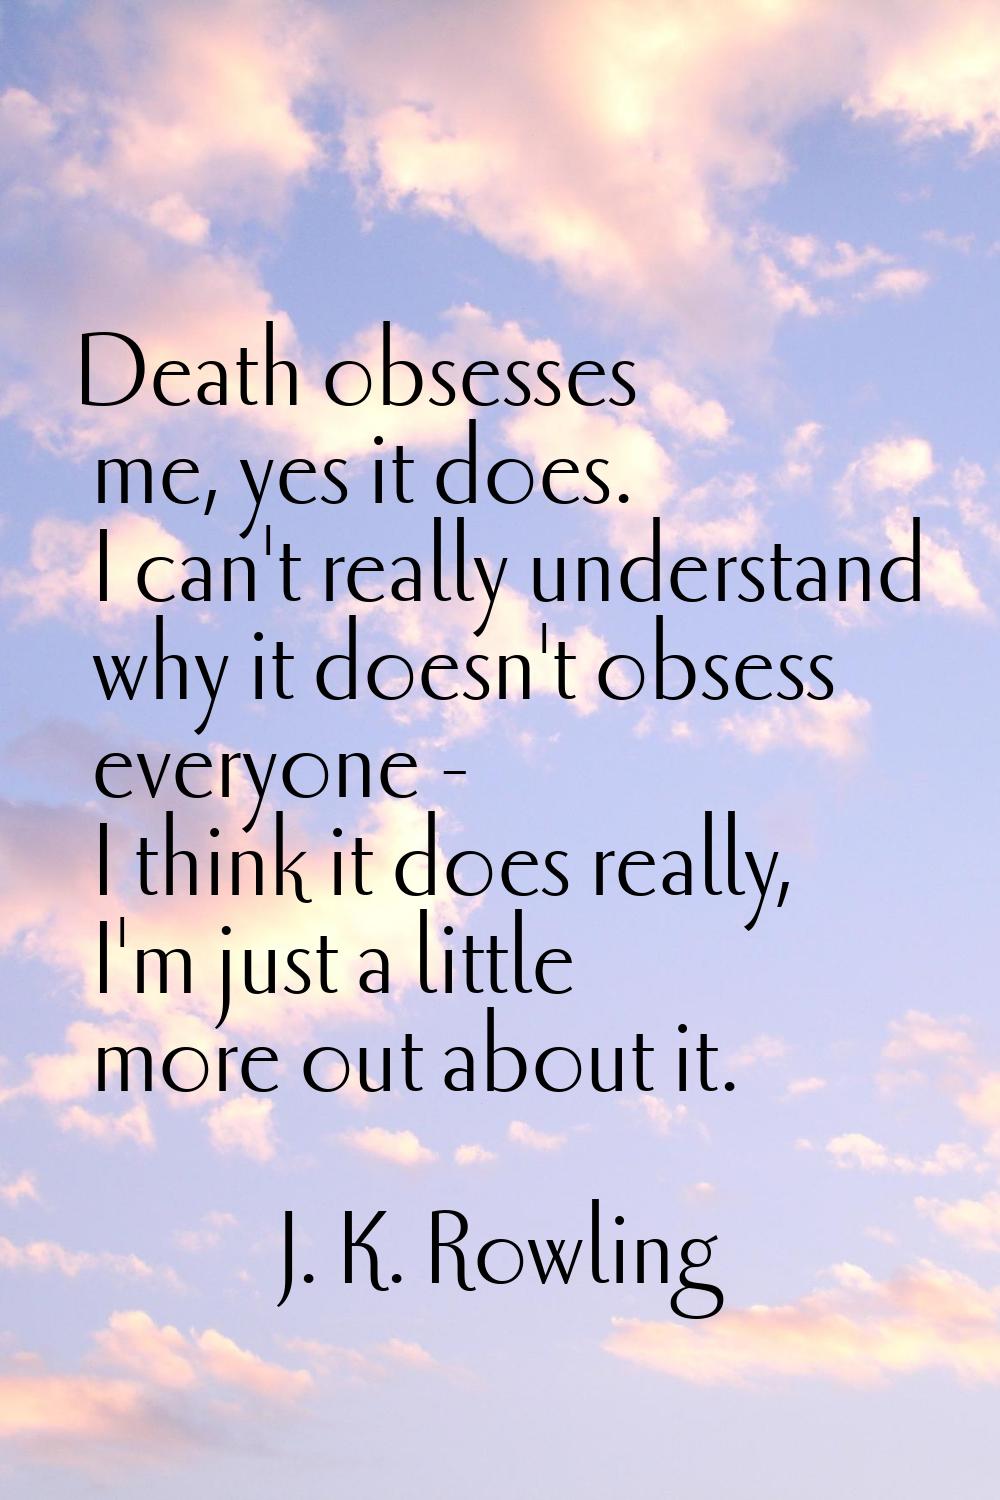 Death obsesses me, yes it does. I can't really understand why it doesn't obsess everyone - I think 